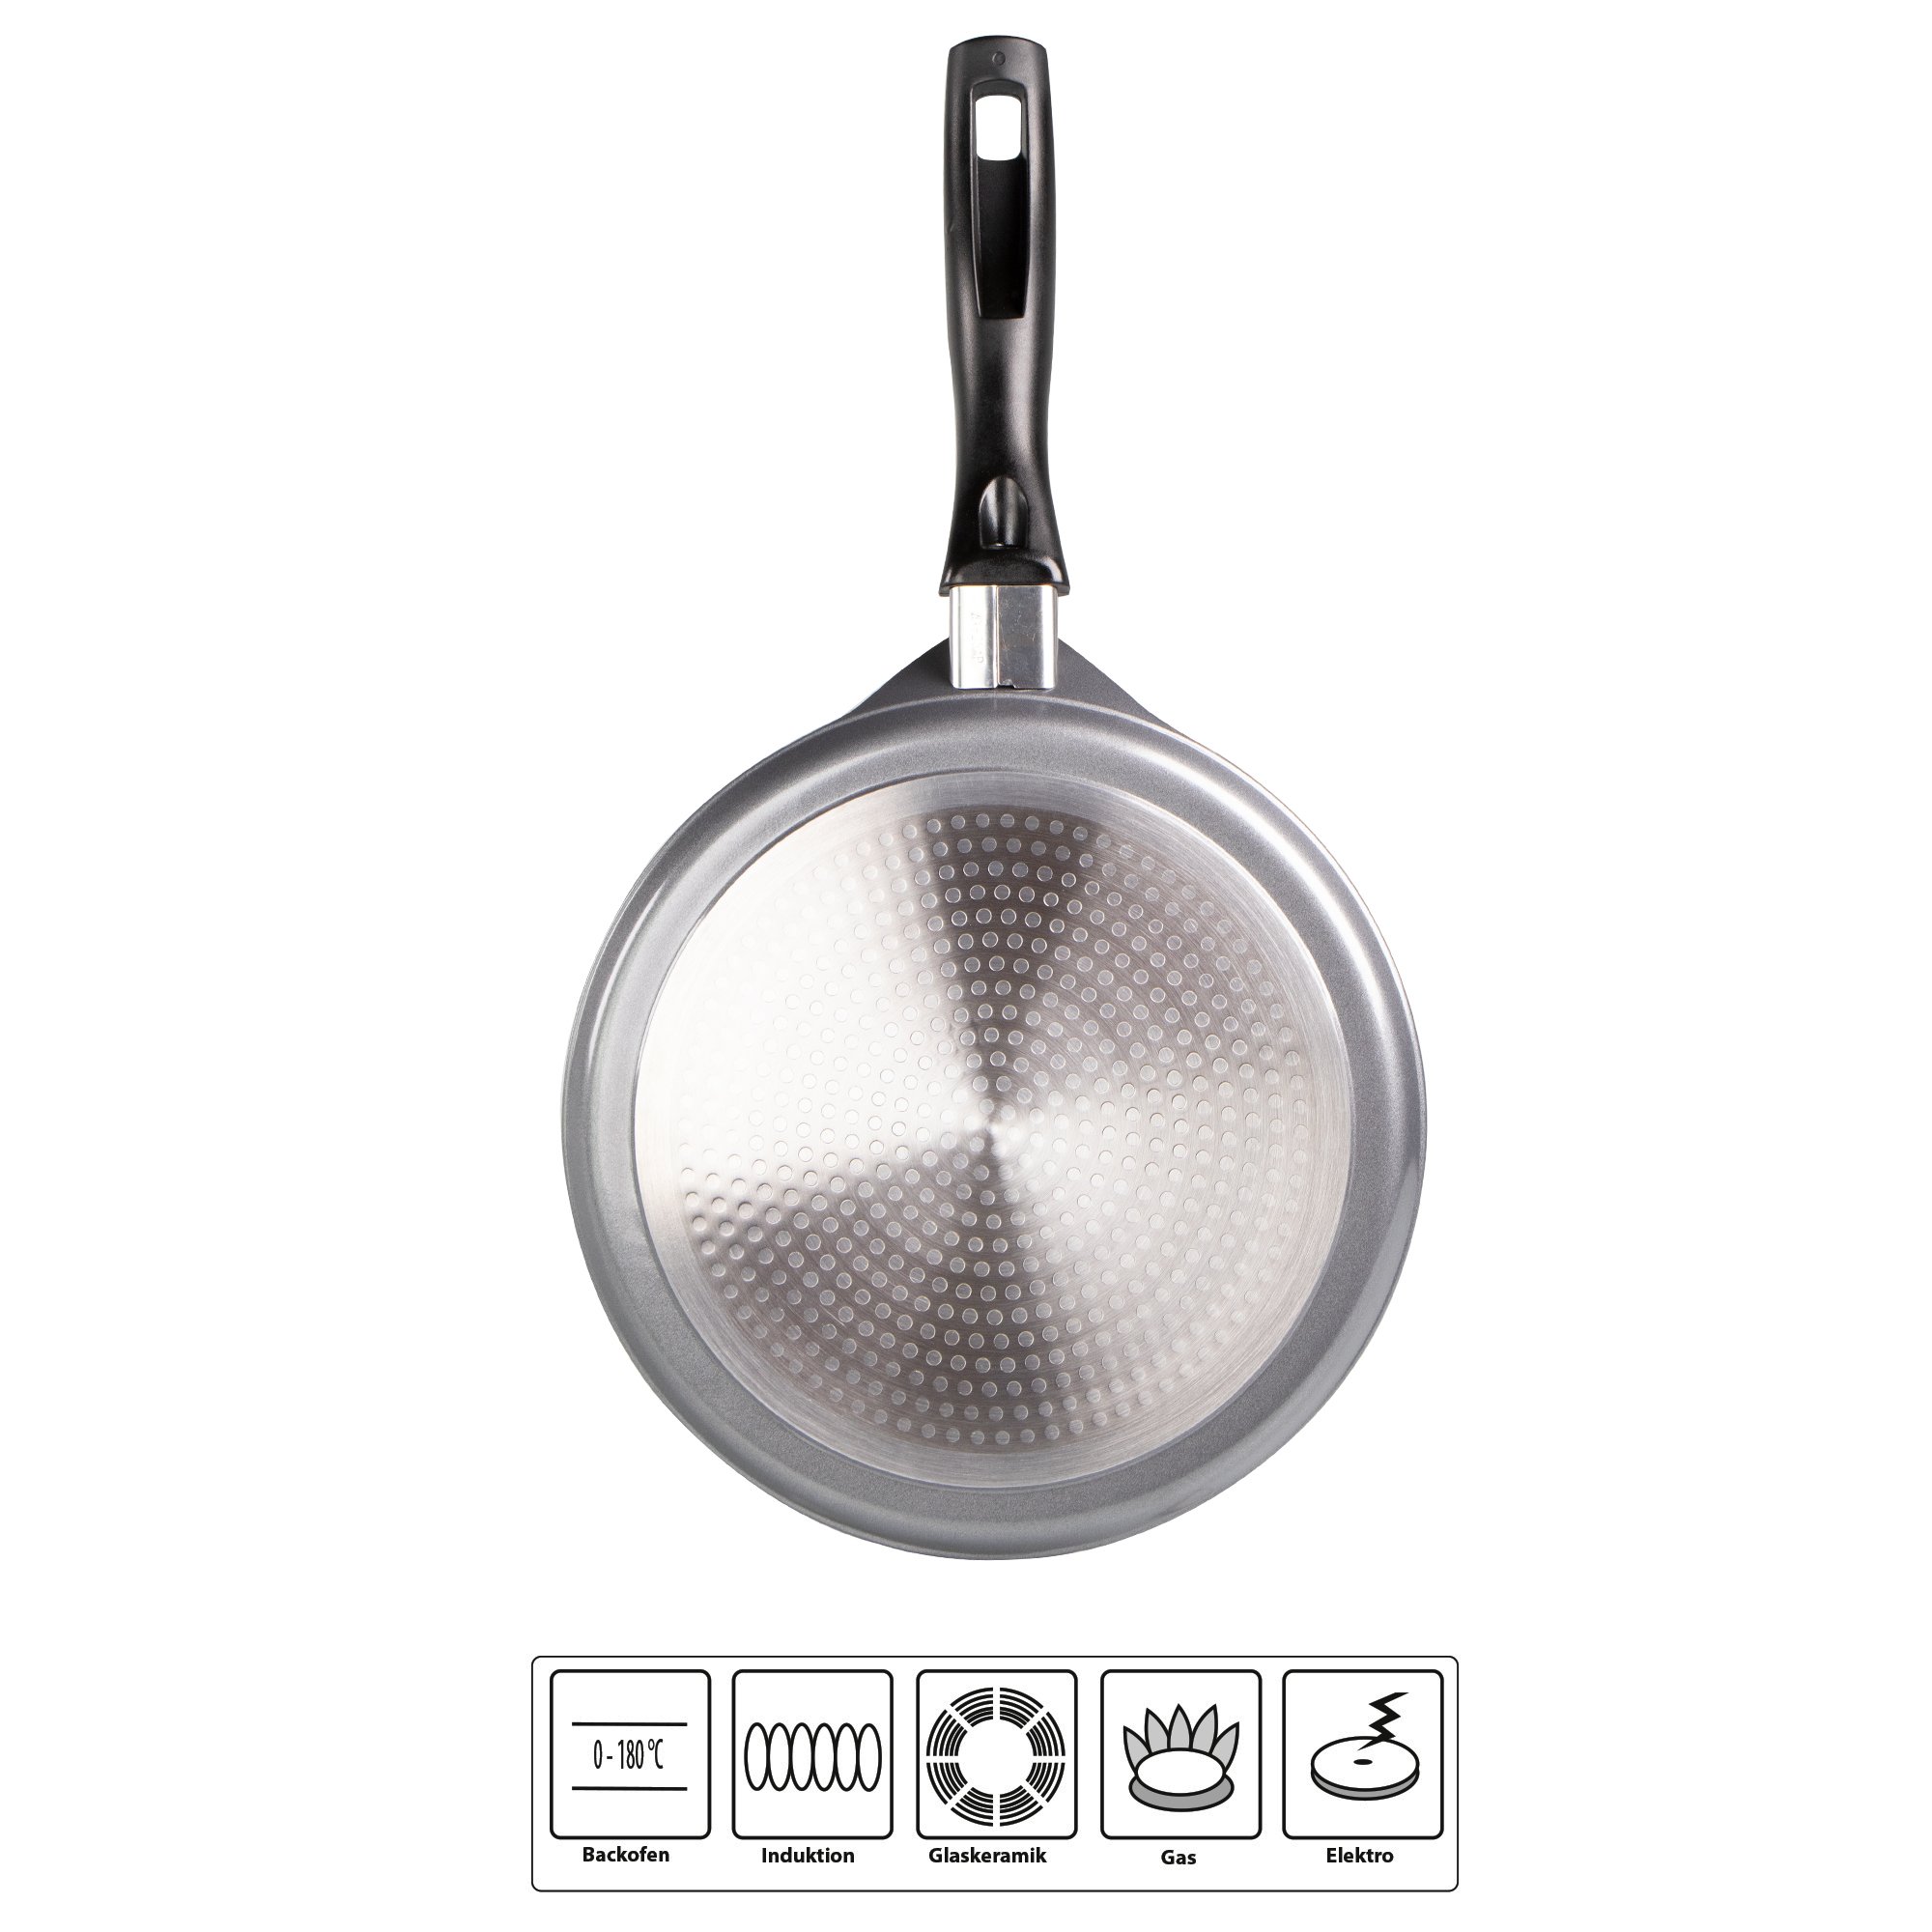 STONELINE® Crepe Pan 25 cm, with Batter Spreader, Flat Non-Stick Pan | CLASSIC